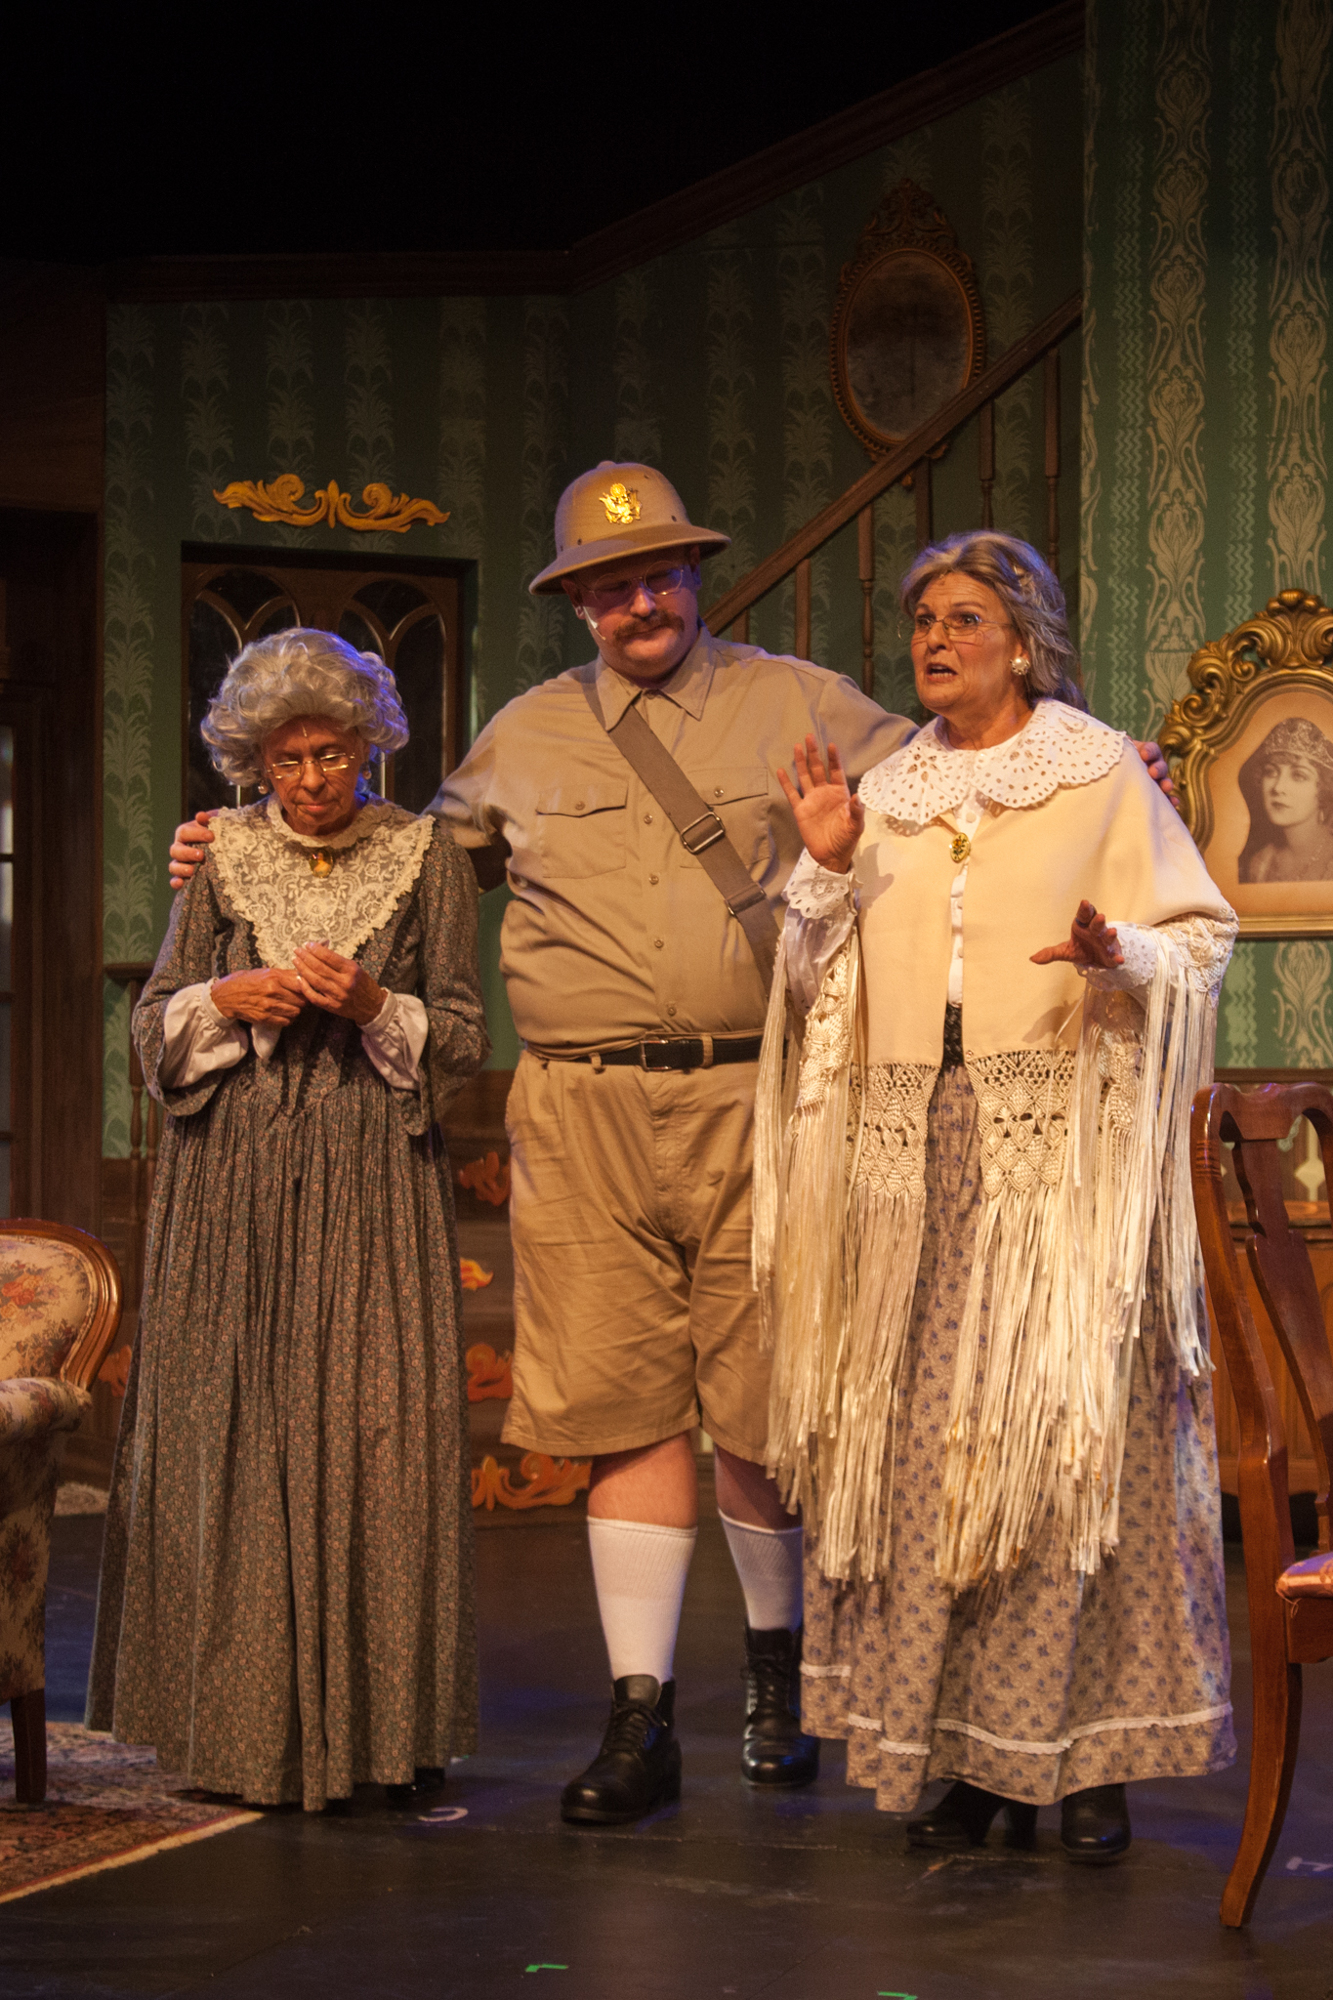 A Madhouse in Full Force in Court Theatre's Wild and Crazy Production of 'Arsenic  and Old Lace', Chicago News